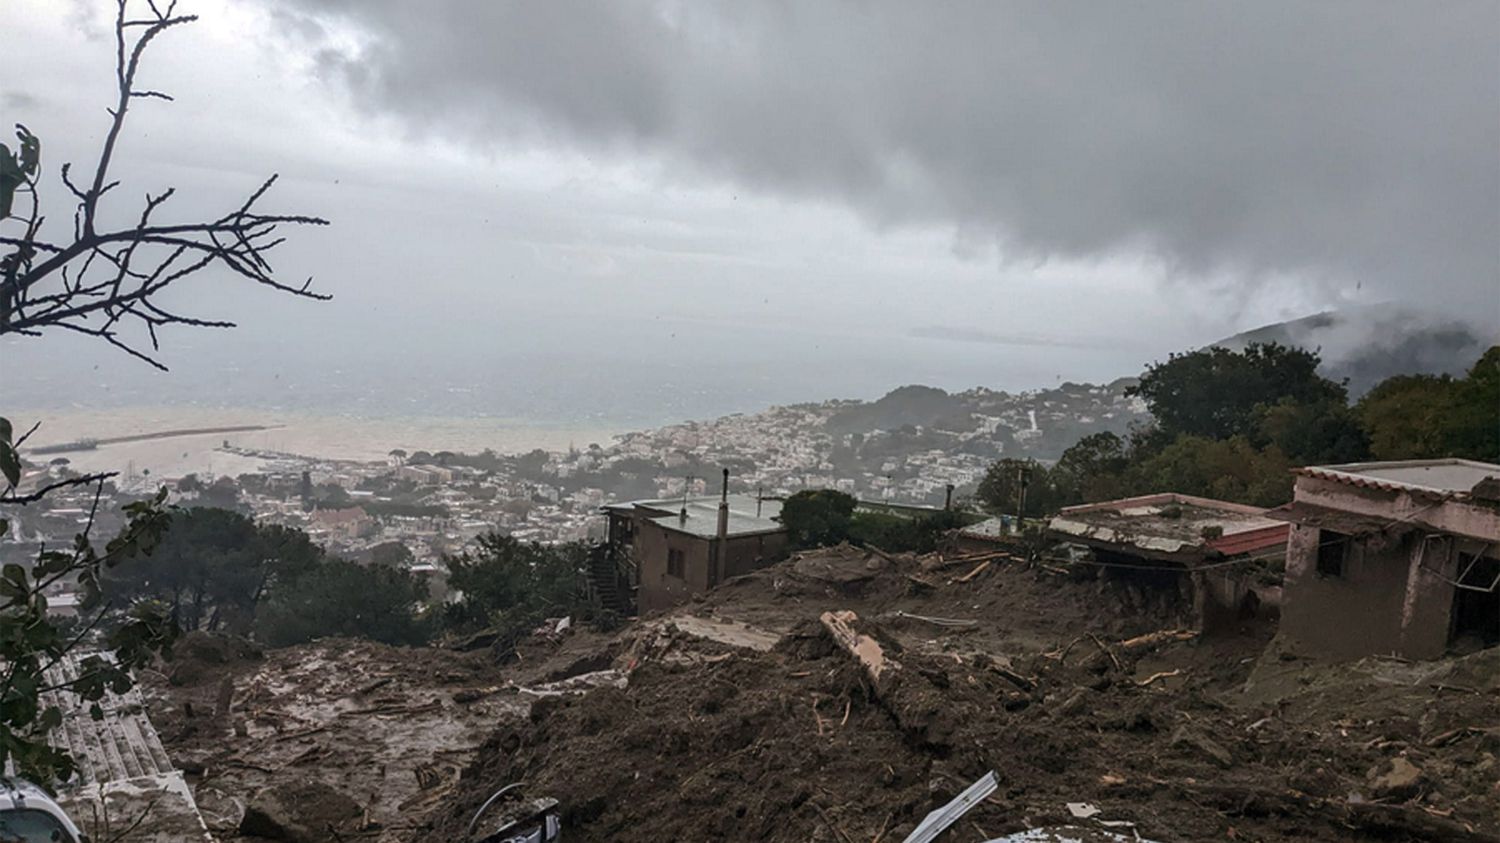 Italy: eight dead after a landslide on the island of Ischia, according to Matteo Salvini, the vice-president of the Council of Ministers
